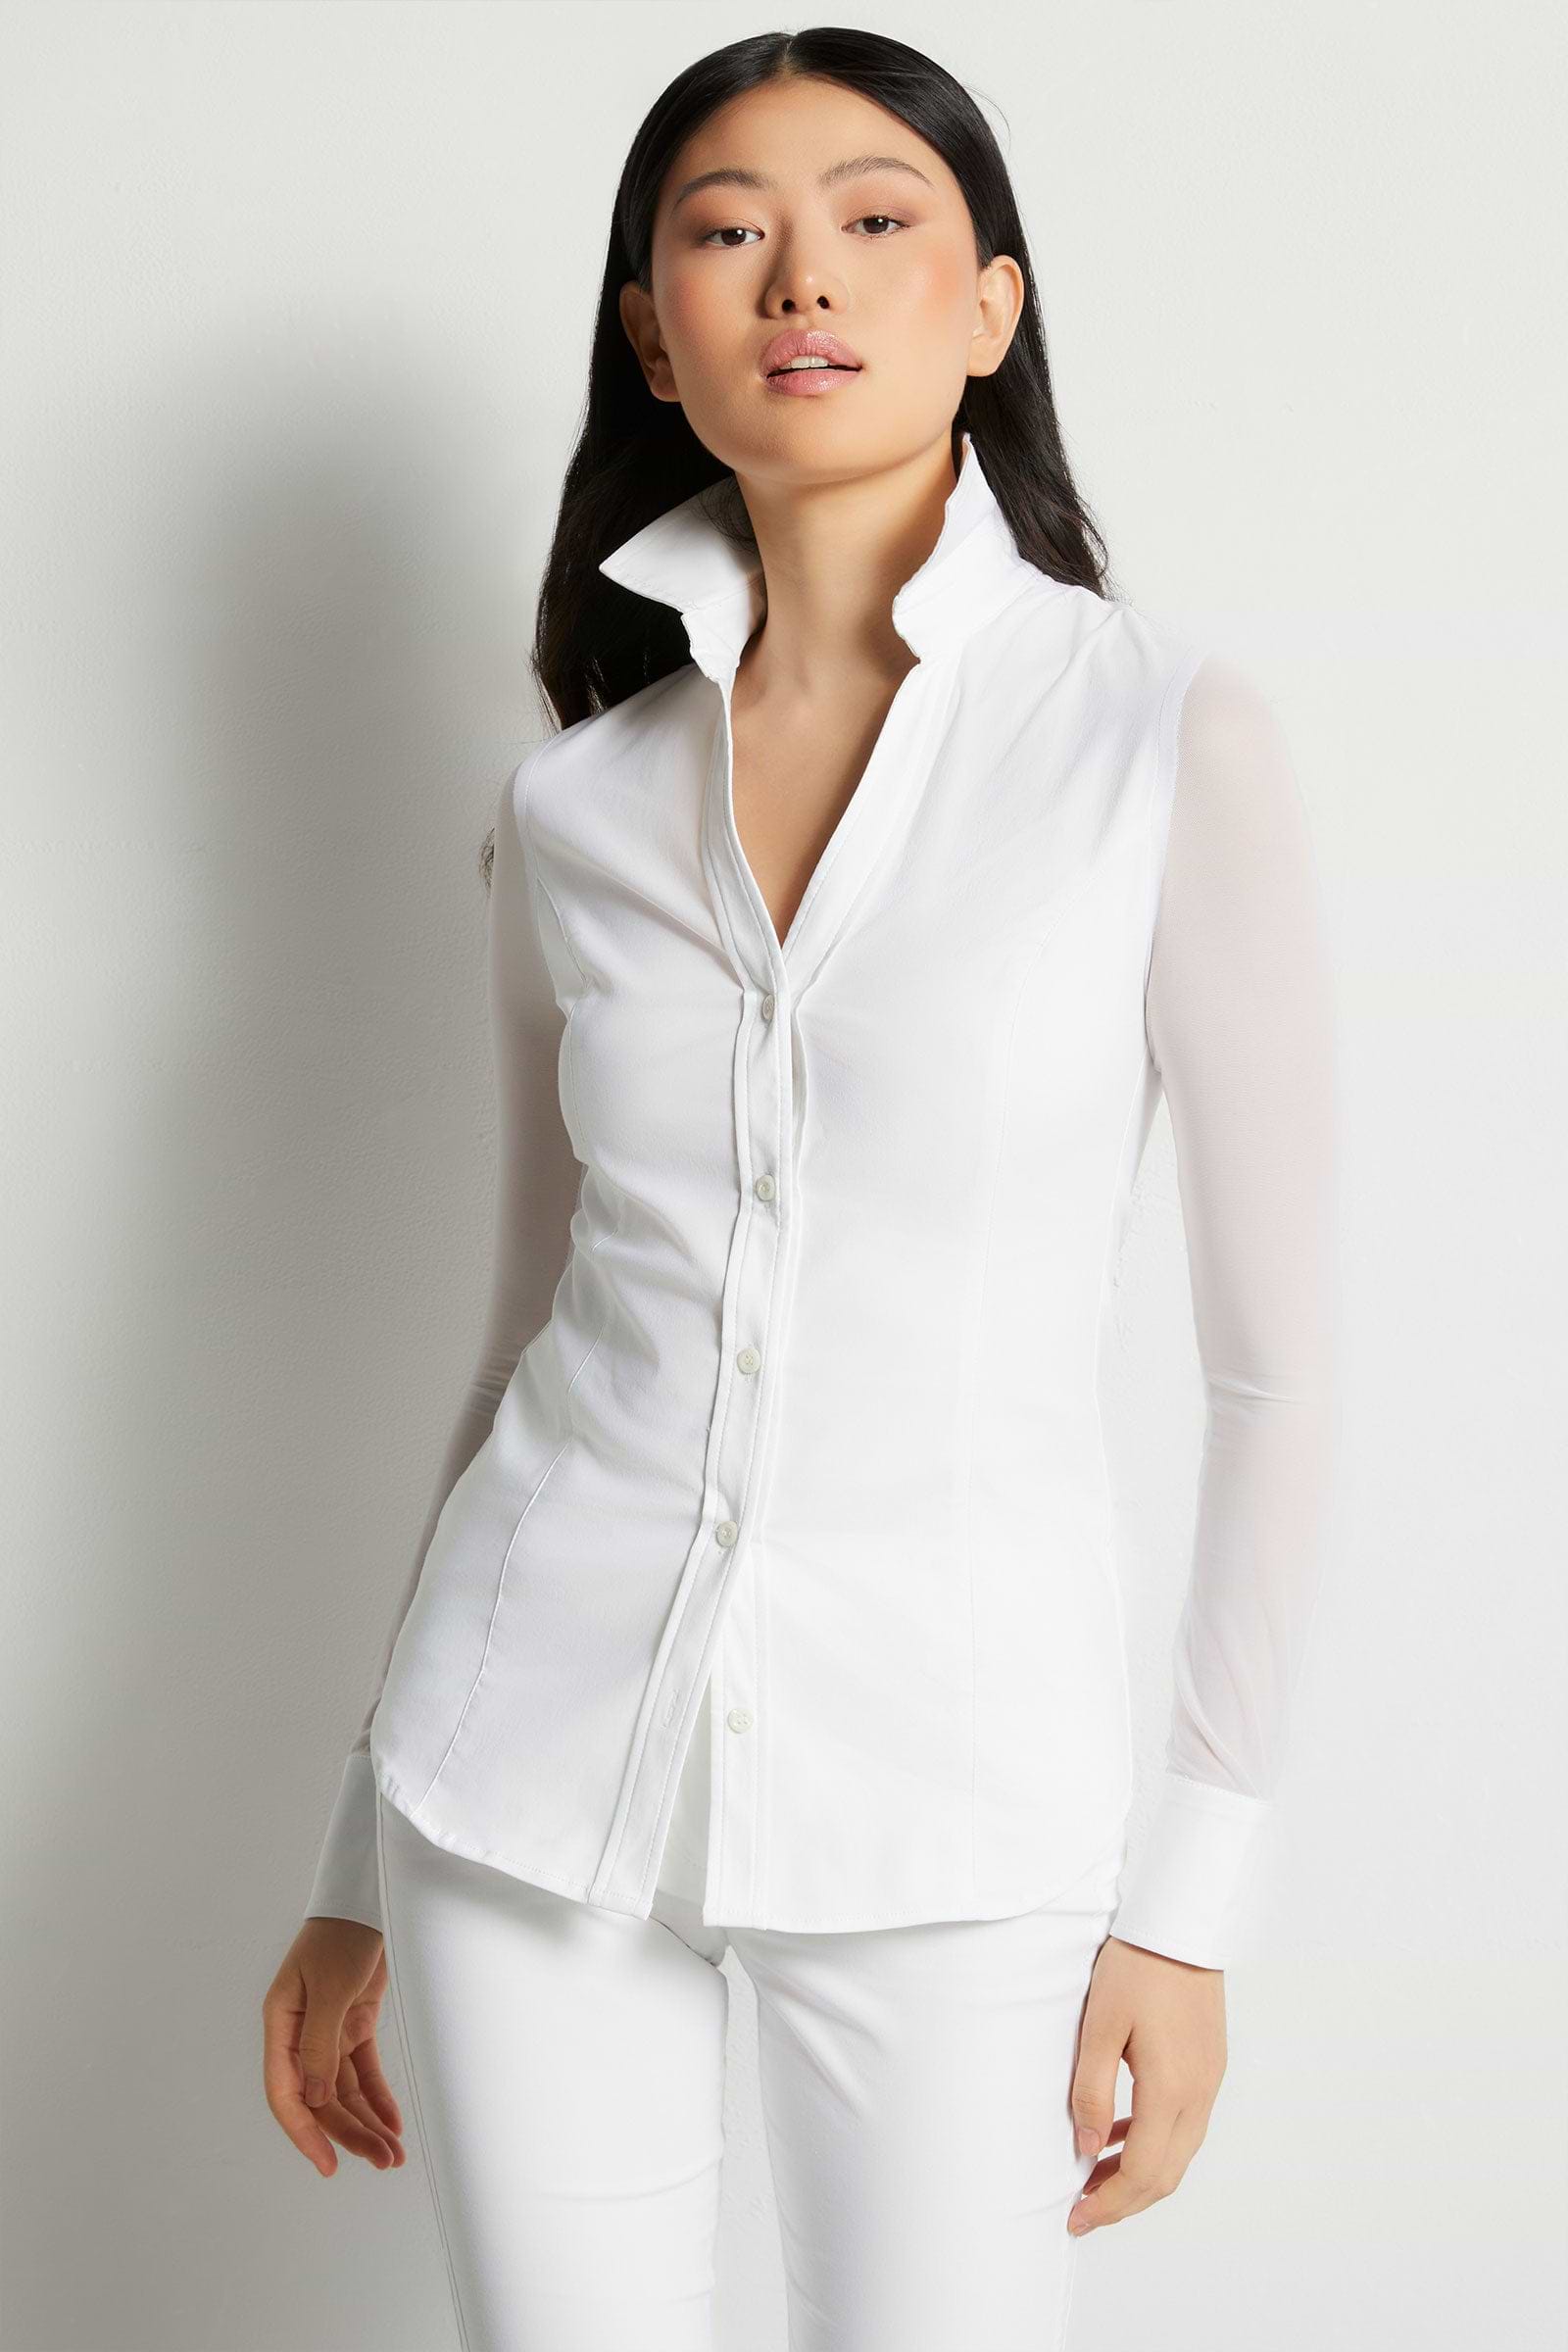 The Best Travel Shirt. Woman Showing the Front Profile of a Beth Button Front Shirt in White